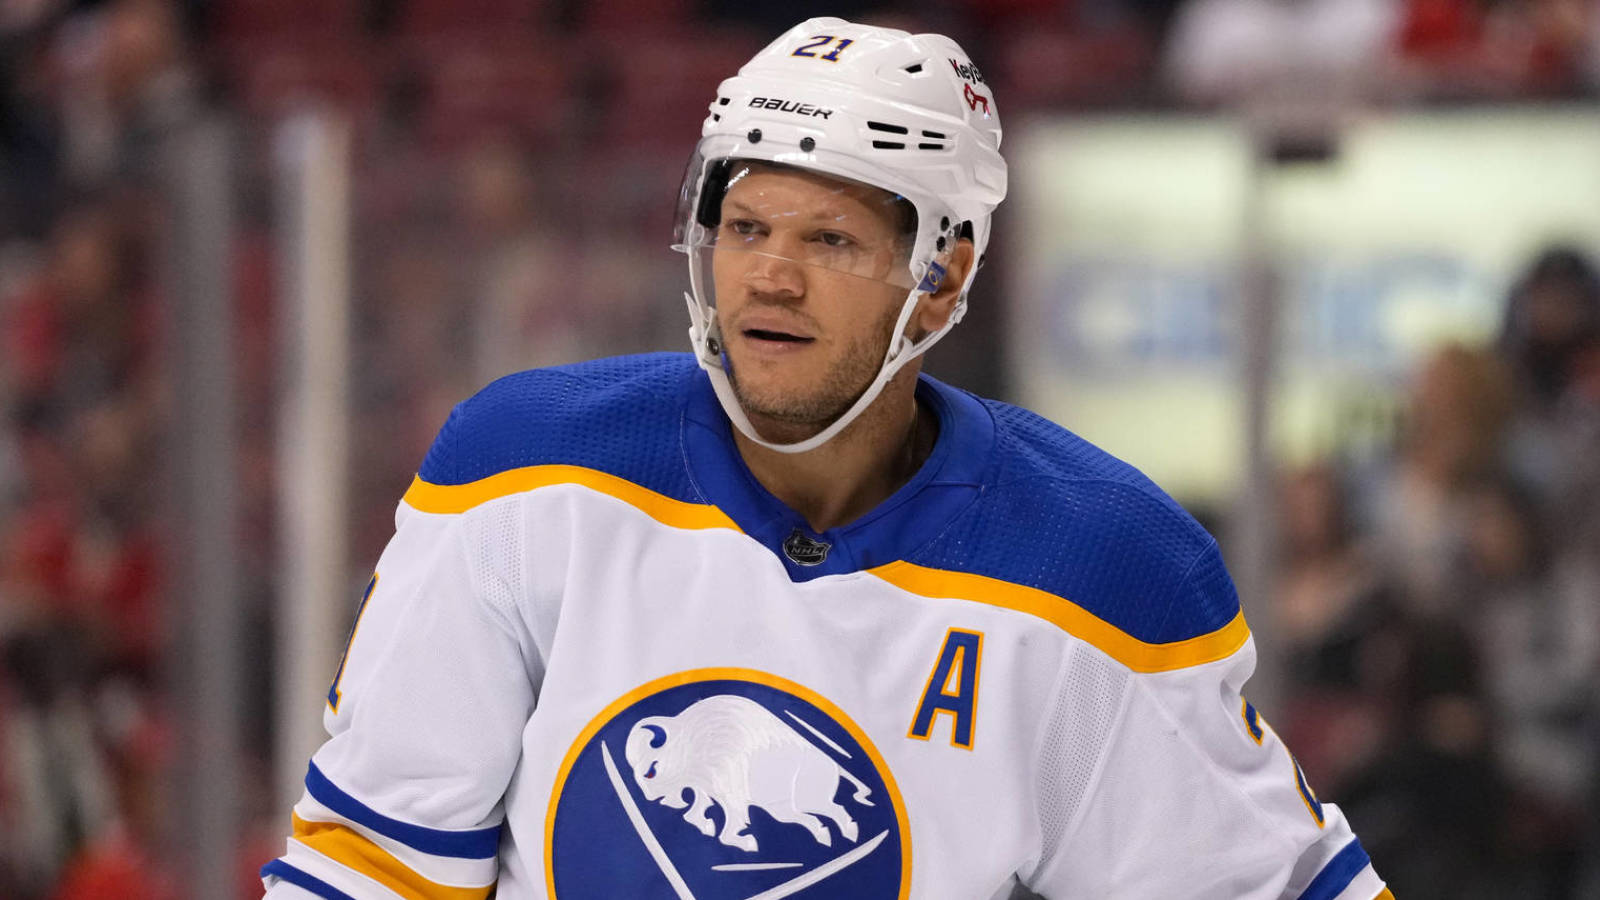 Kyle Okposo leads NY Islanders to 5-4 comeback win over Wild in